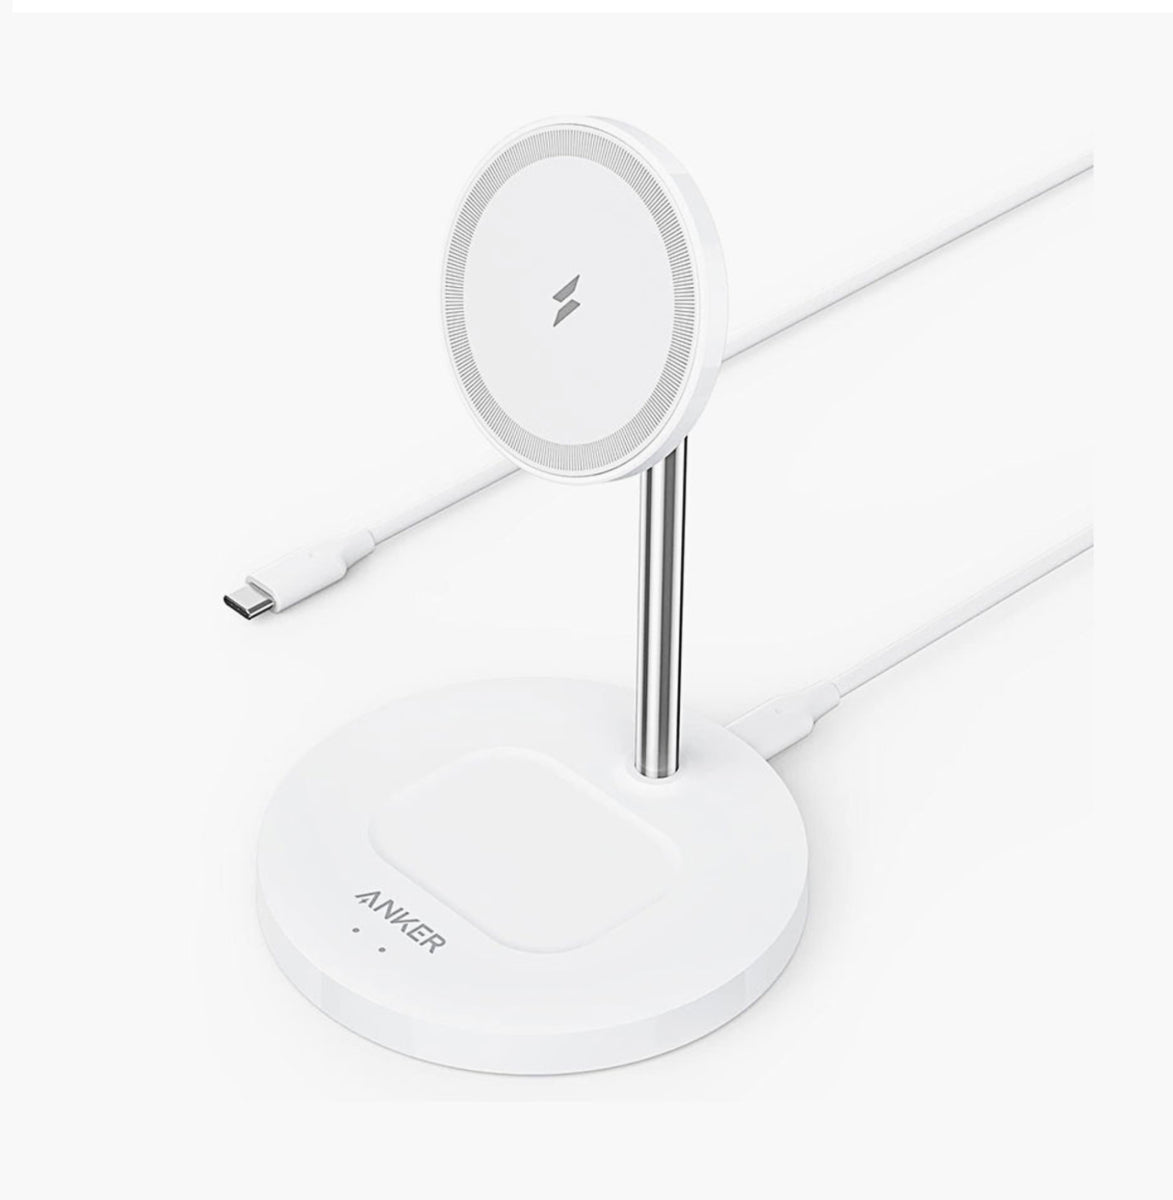 Anker Powerwave Magnetic 2-In-1 Stand Lite - White